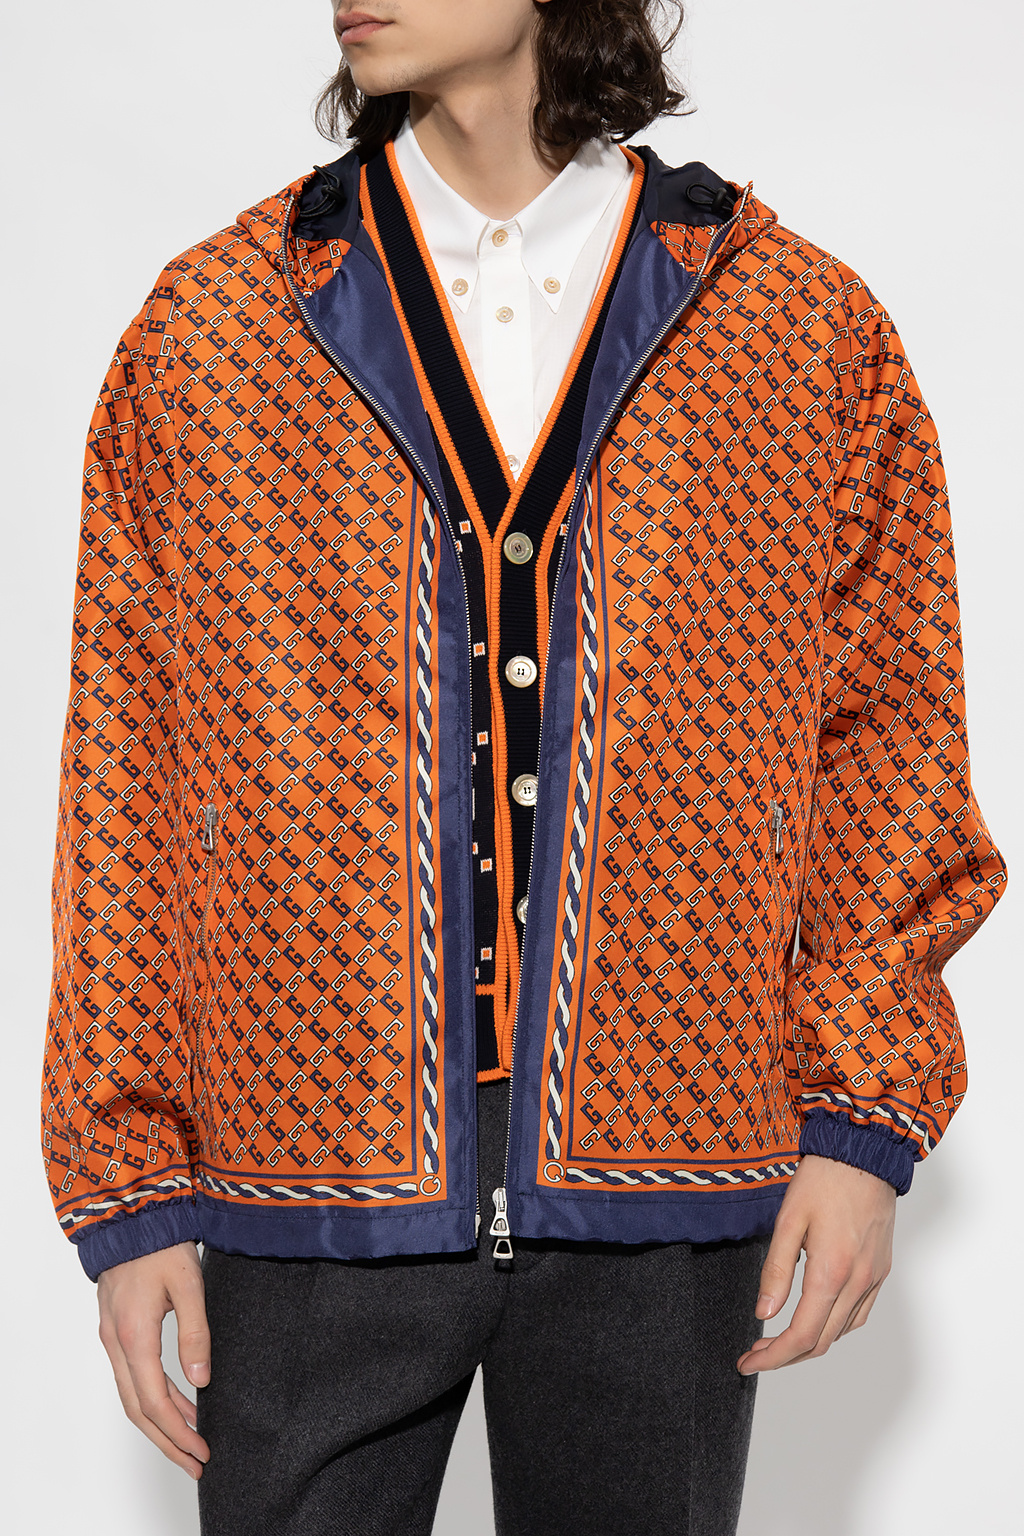 gucci has Patterned hooded jacket